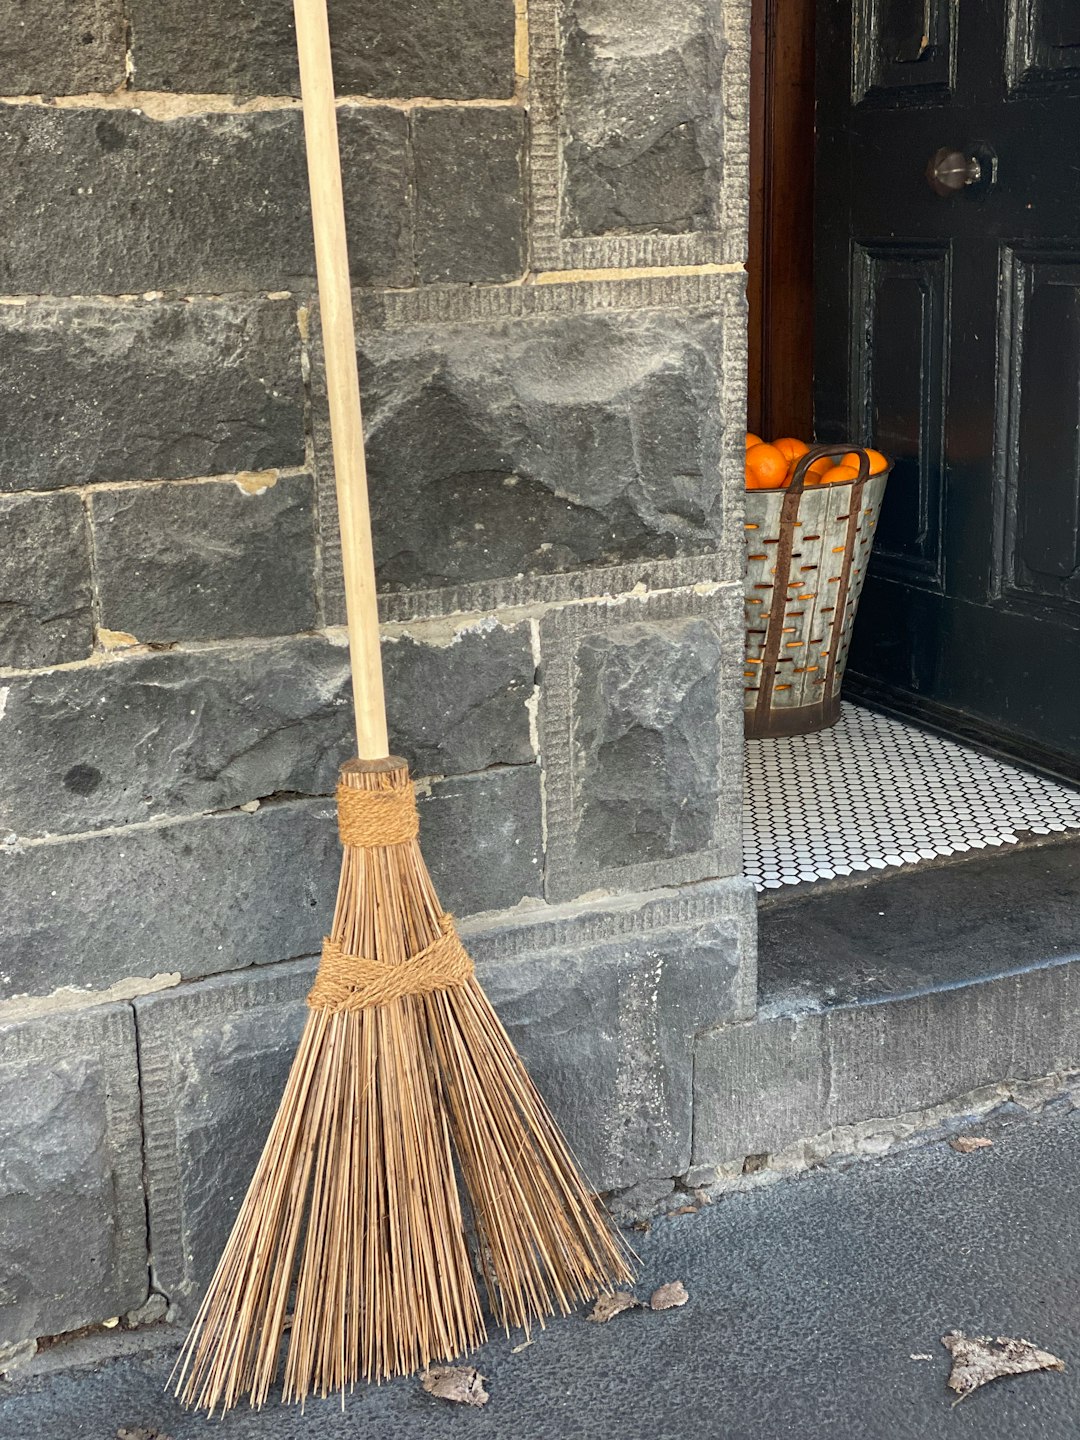  brown broom leaning on gray concrete wall broom